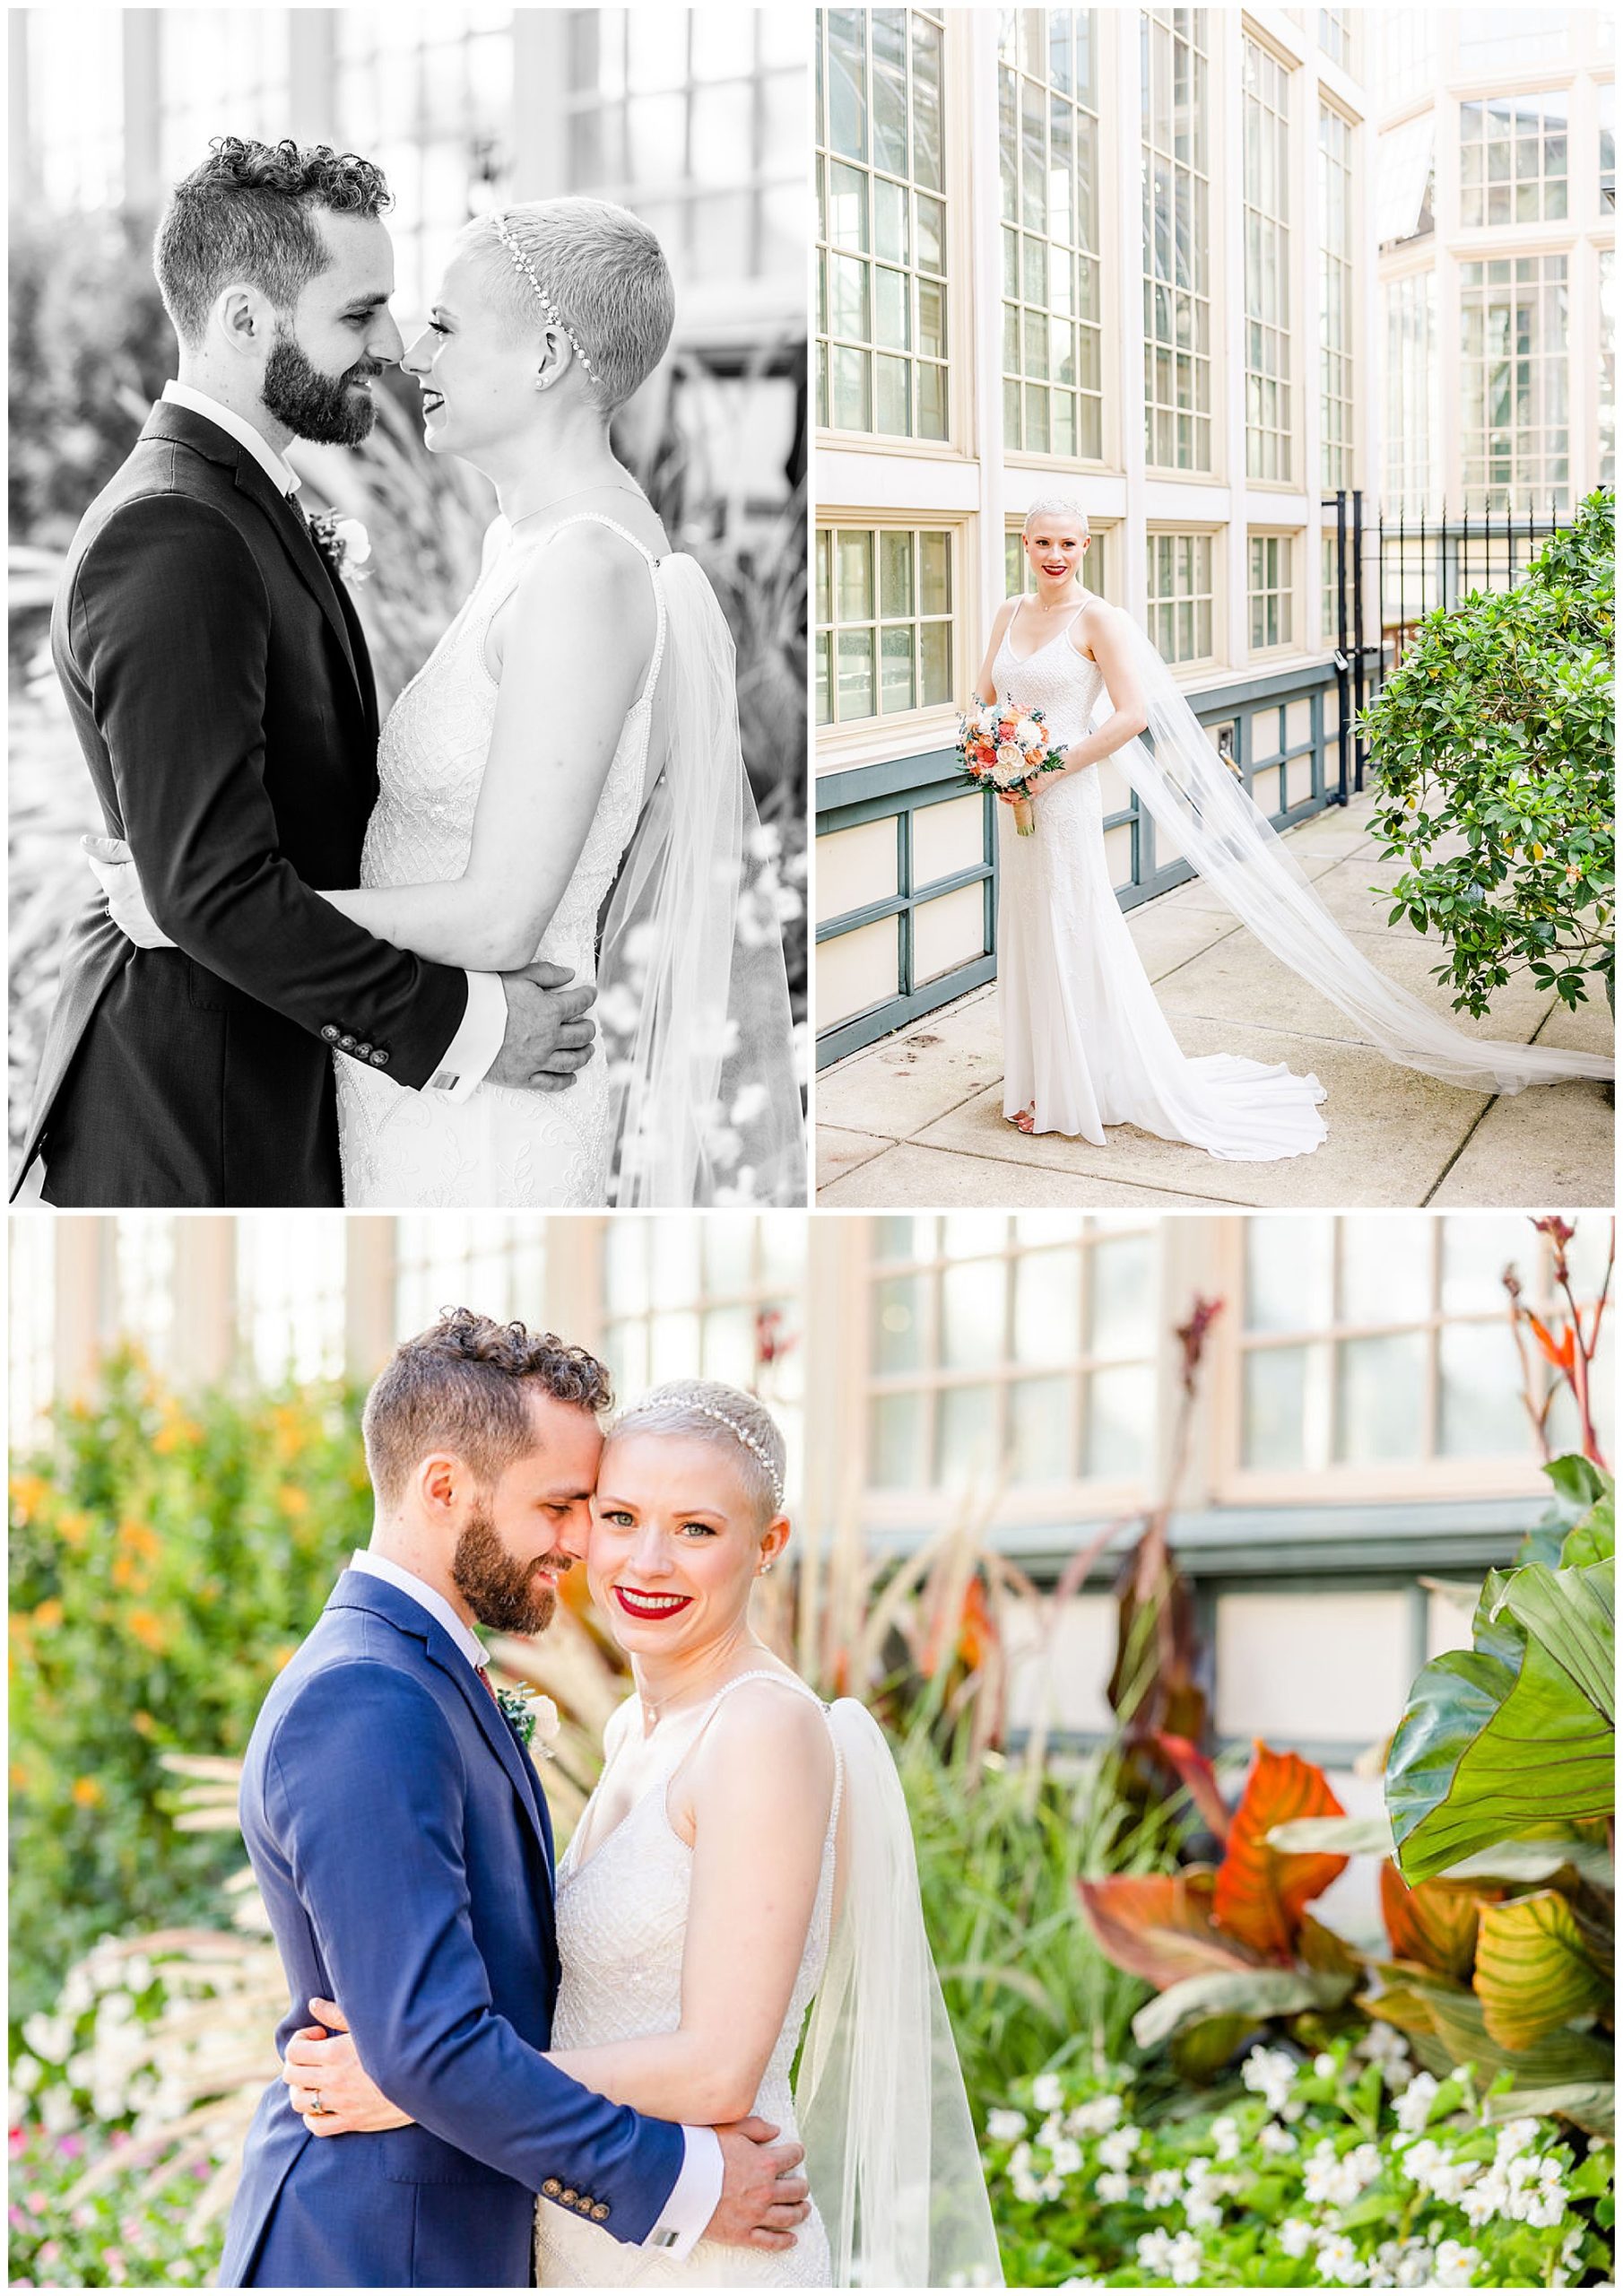 ethereal Rawlings Conservatory wedding, Baltimore wedding venues, Baltimore wedding photographer, Baltimore micro-wedding, Baltimore wedding photography, autumn wedding aesthetic, botanical gardens wedding, Baltimore botanical garden wedding, DC wedding photographer, Rachel E.H. Photography, black and white, couple almost kissing, bride with orange and pink bouquet